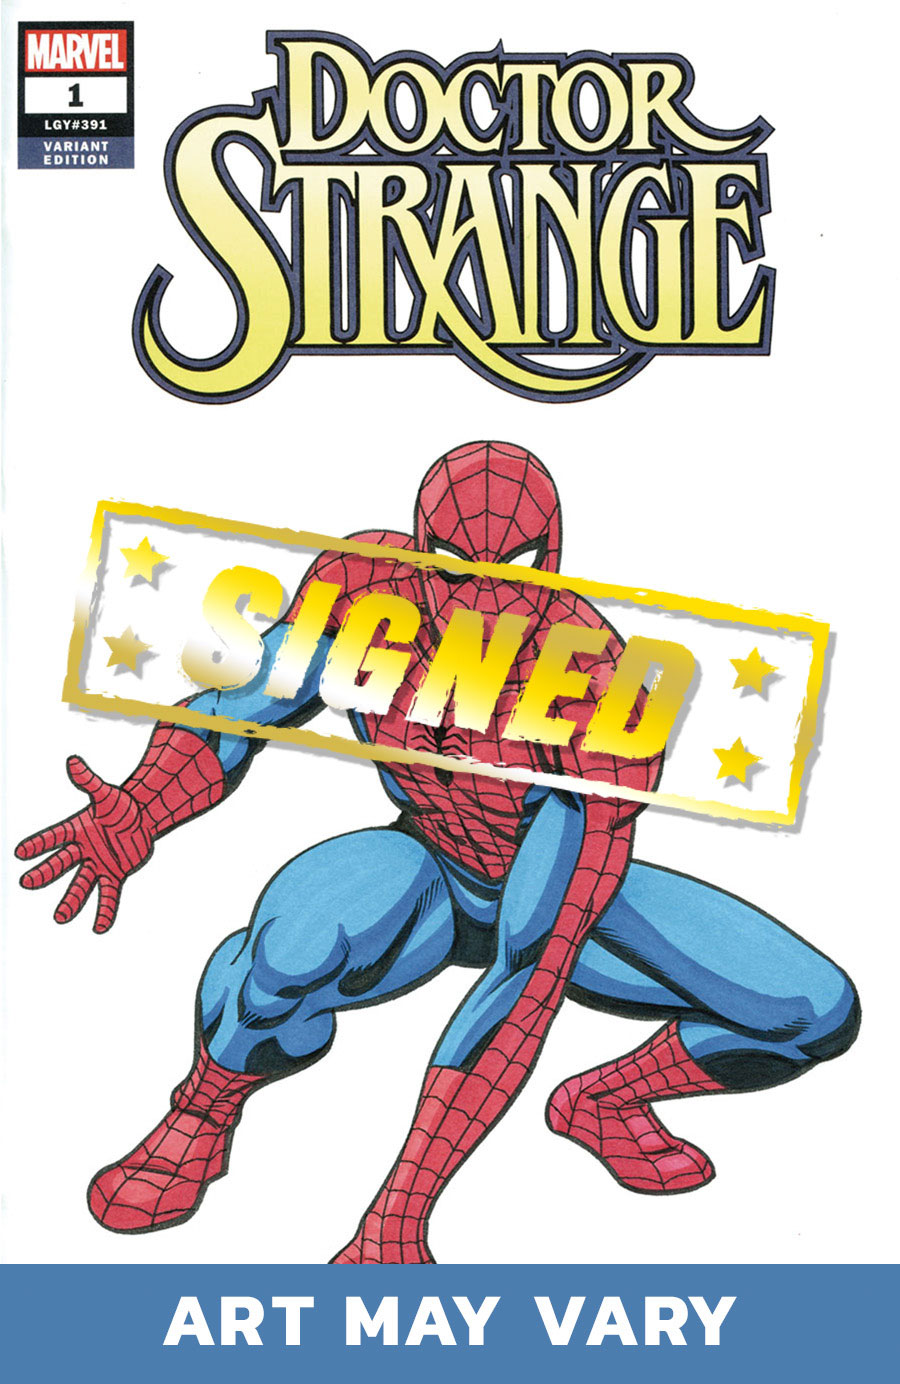 Marvel Comics Commissioned Cover Art Signed & Remarked By Brendon Fraim & Brian Fraim With A Hand-Drawn Spider-Man Sketch